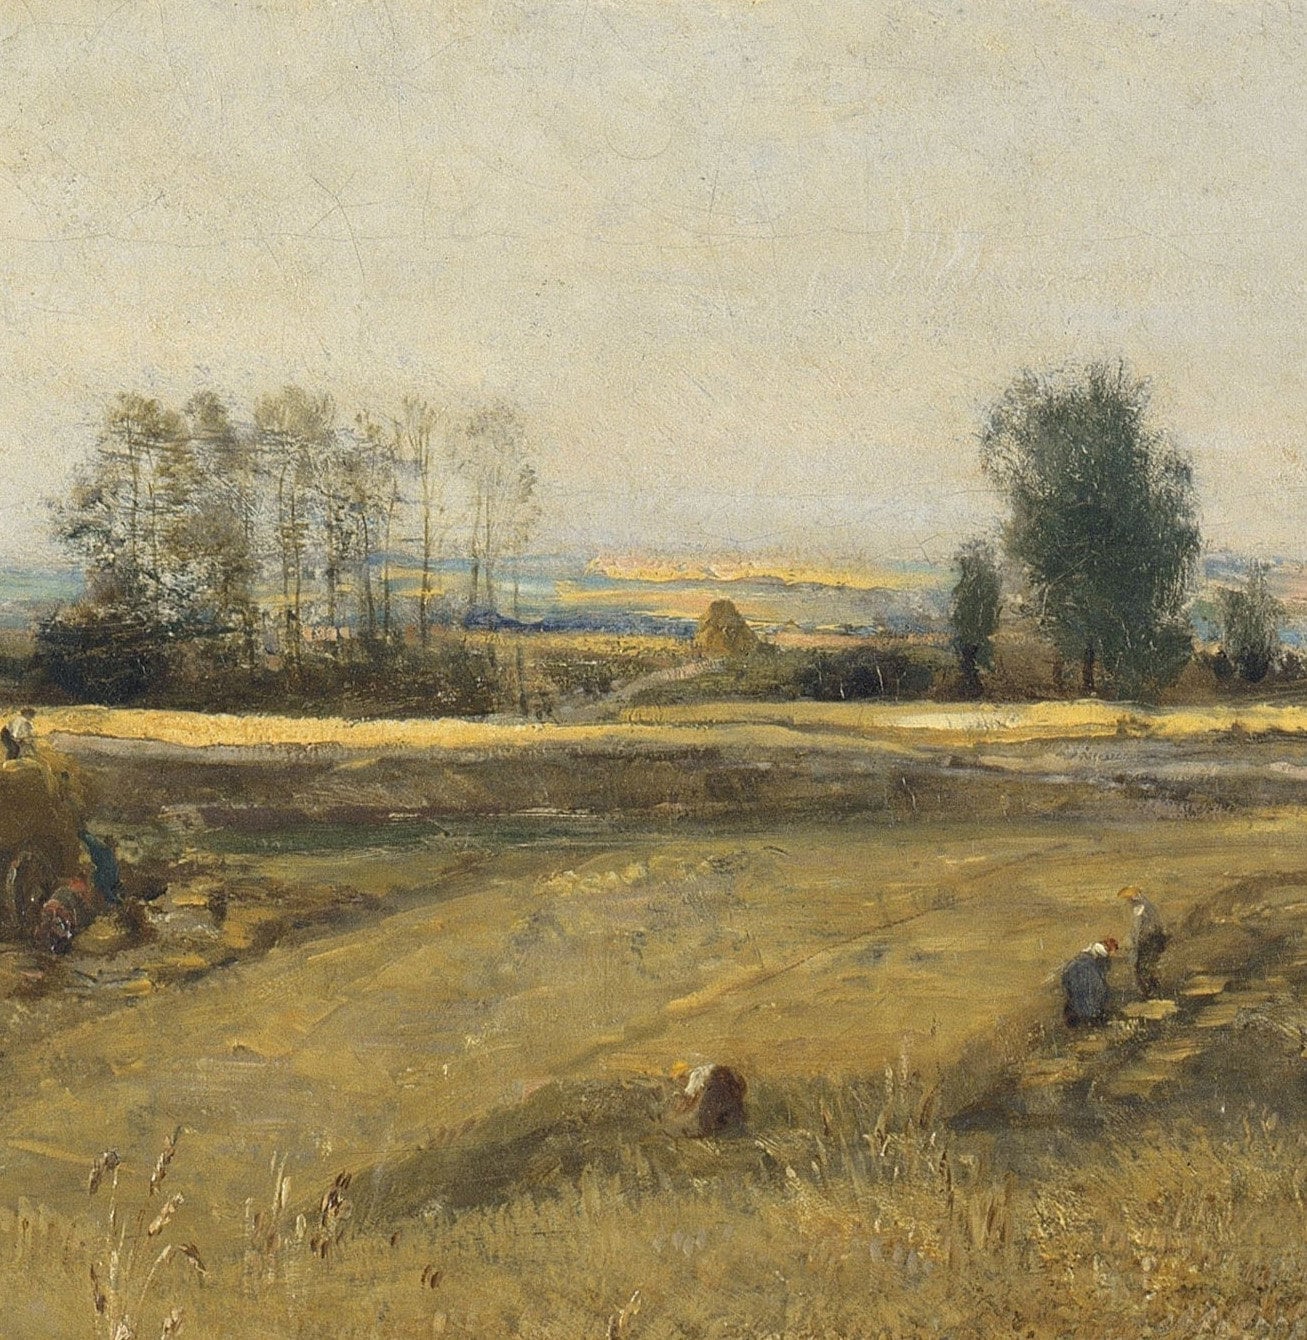 Harvest by Charles François Daubigny , 3d Printed with texture and brush strokes looks like original oil-painting, code:551